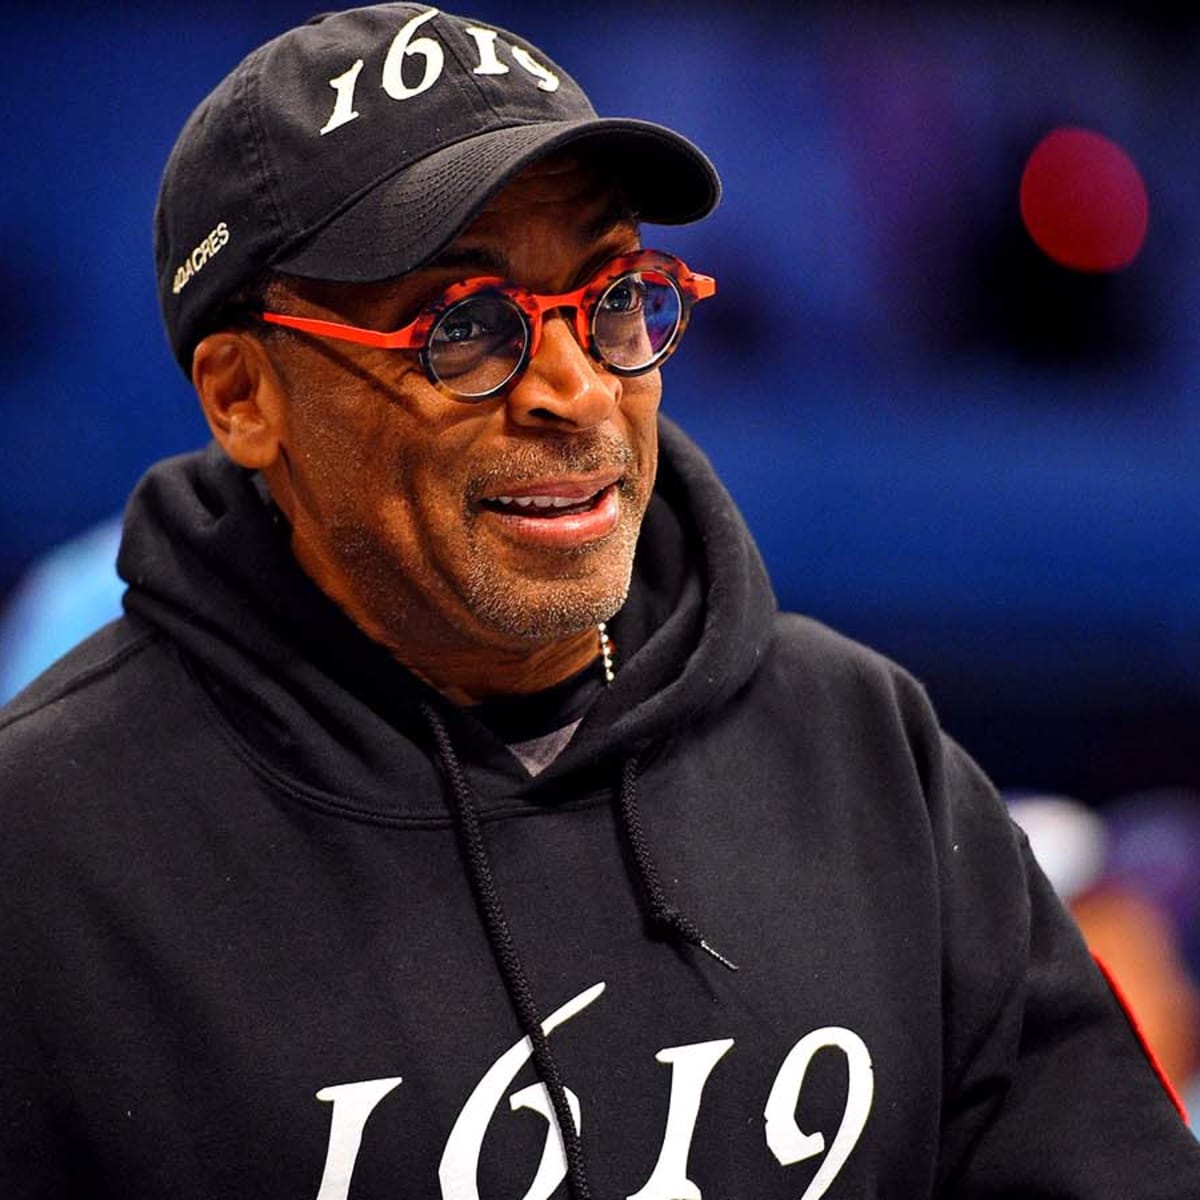 Spike Lee done attending Knicks games this season after 'being harassed by  James Dolan' at MSG; team responds 